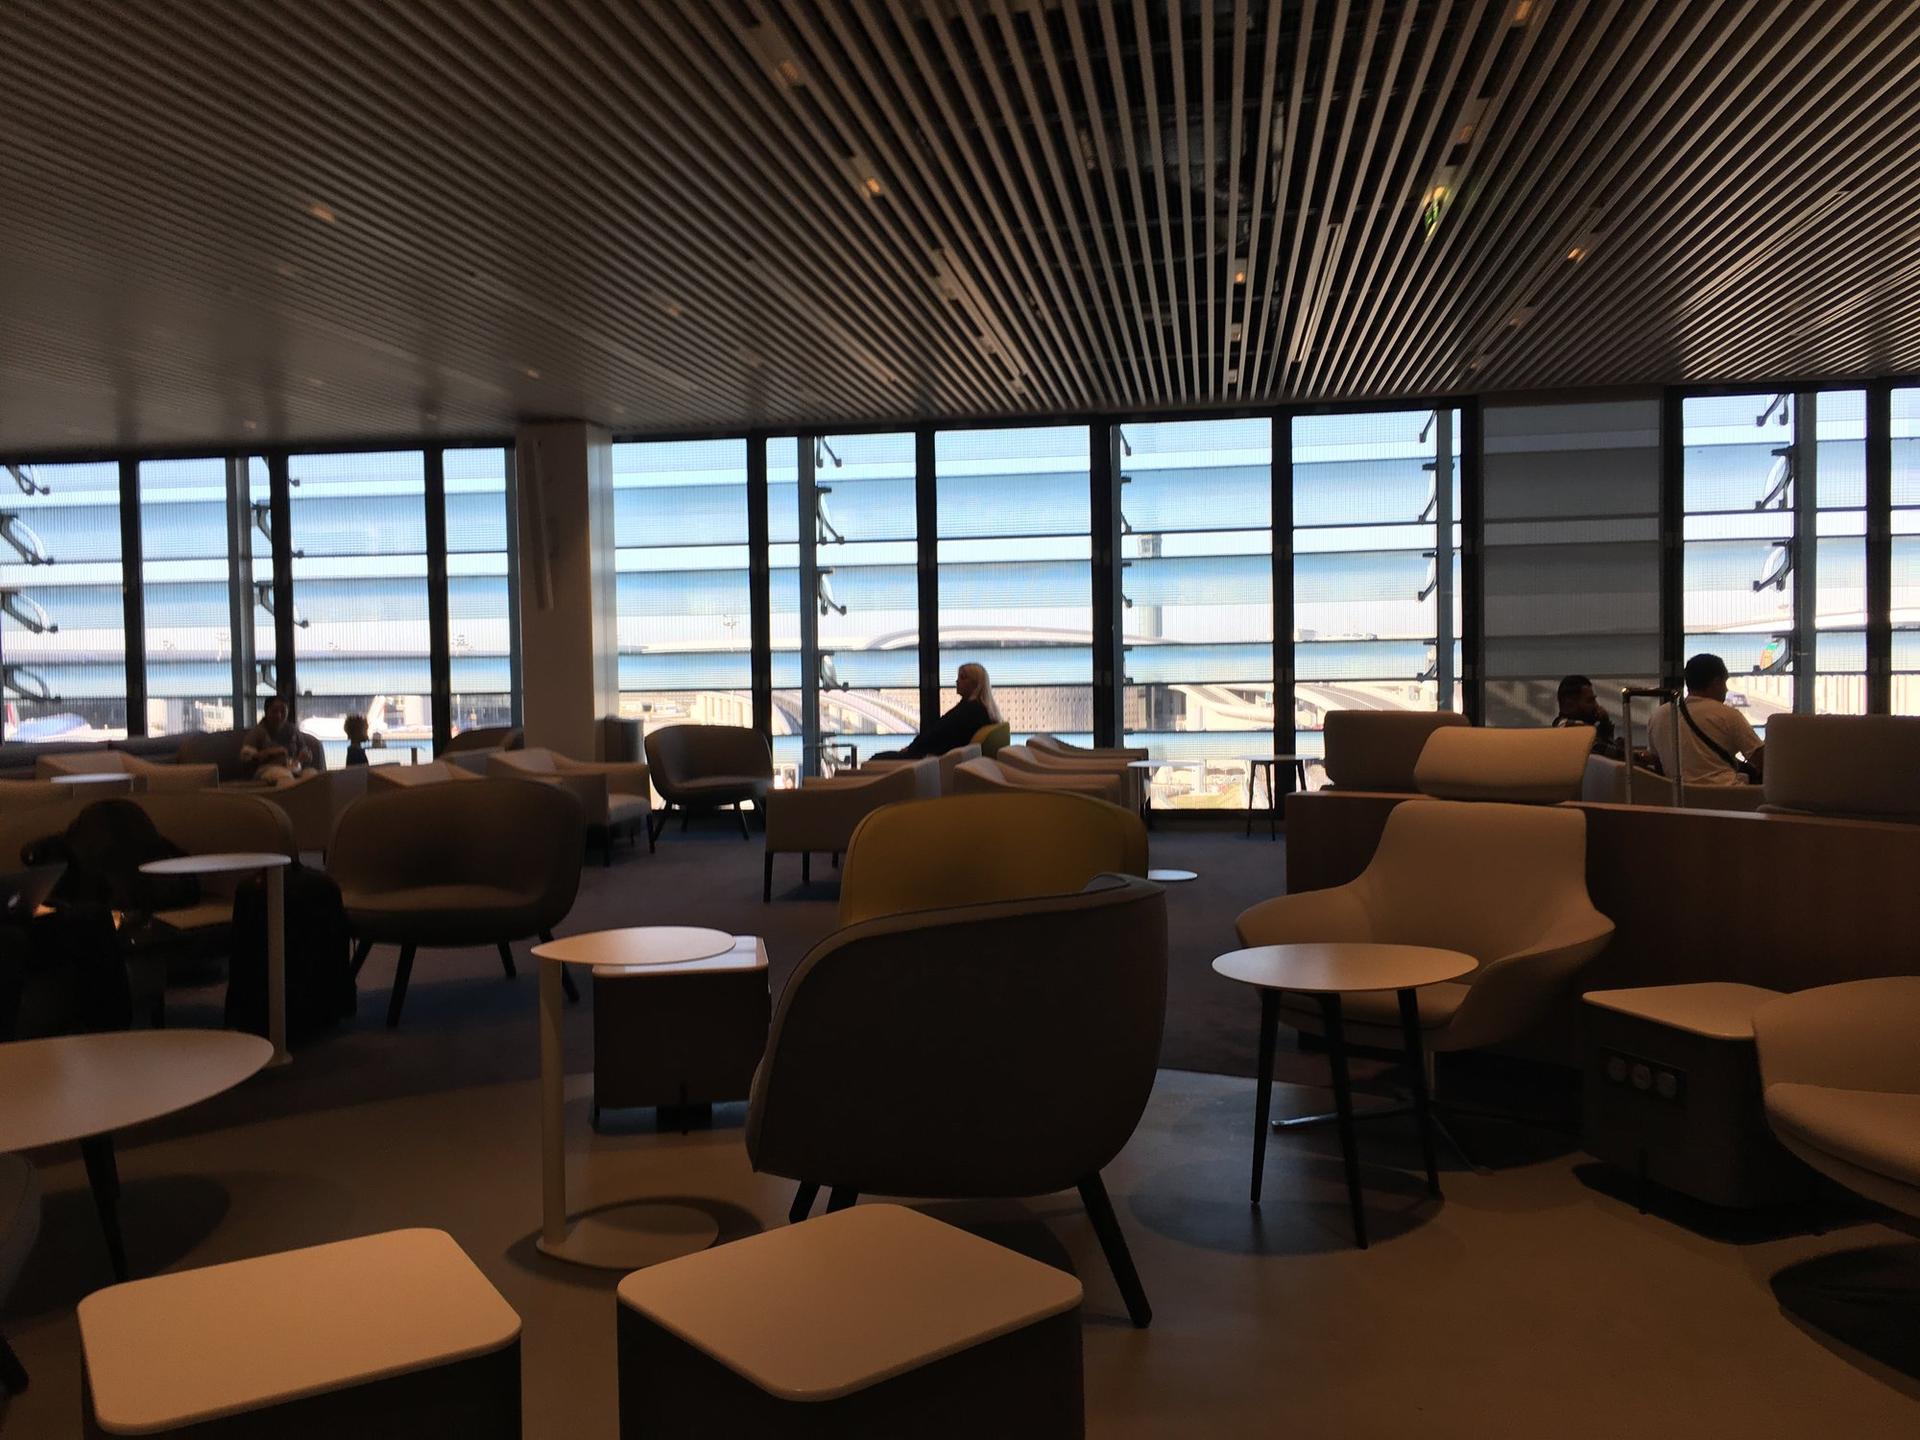 Air France Lounge (Concourse L) image 51 of 57